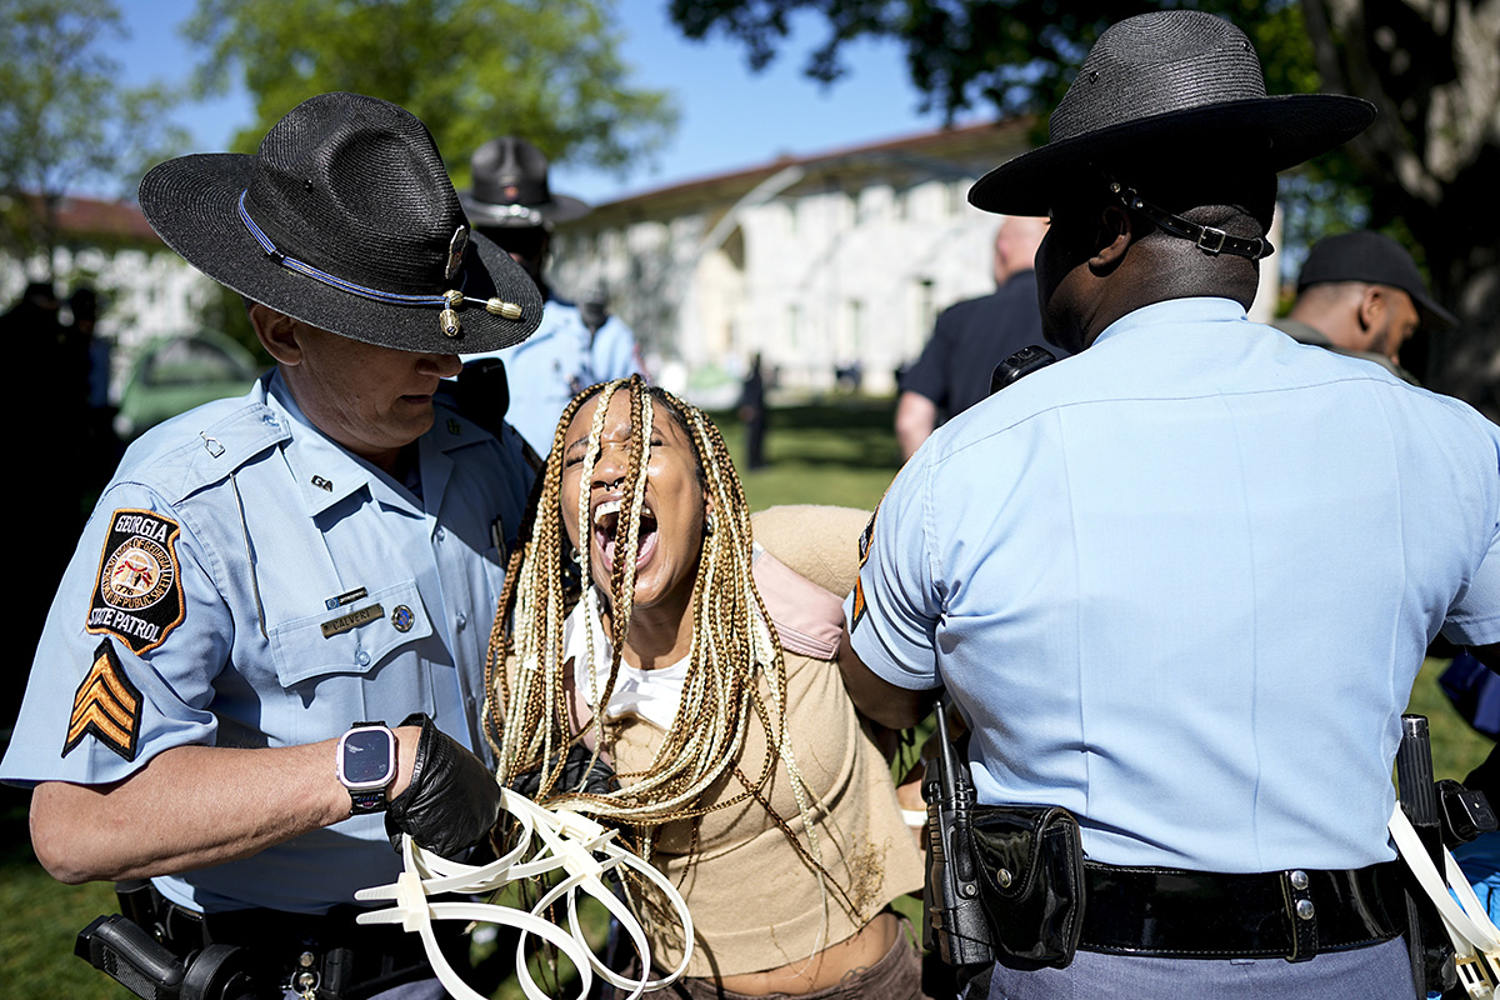 Nationwide campus protests result in more than 2,000 arrests and ongoing free speech tensions